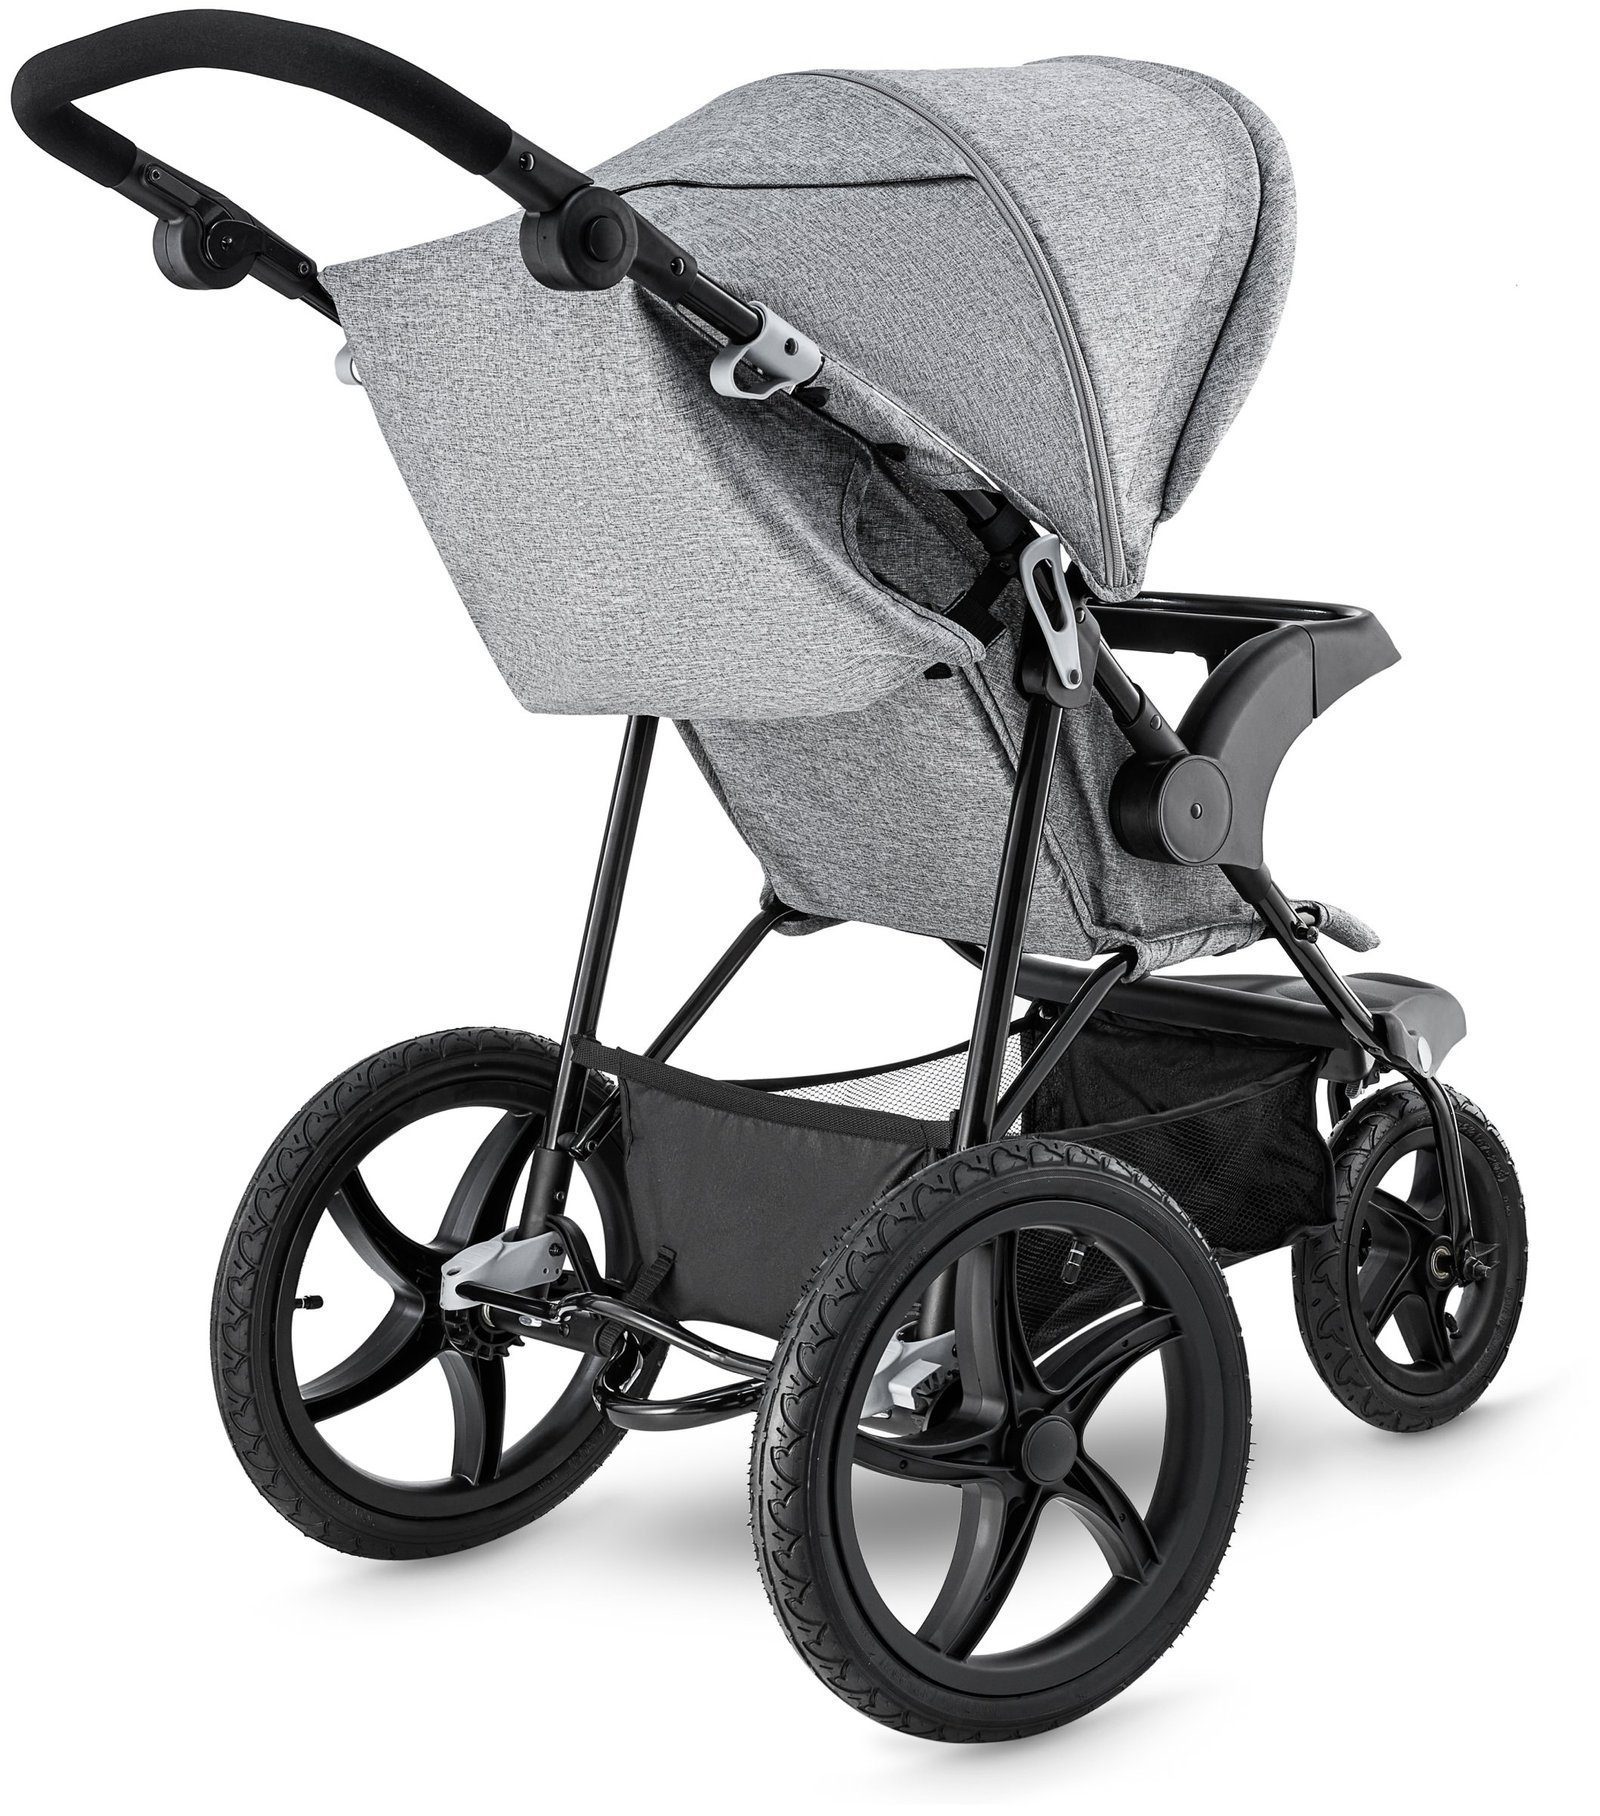 Moby-System 0m+ Babyjogger+Buggy Moby-System MOUNTAIN Dreirad-Kinderwagen